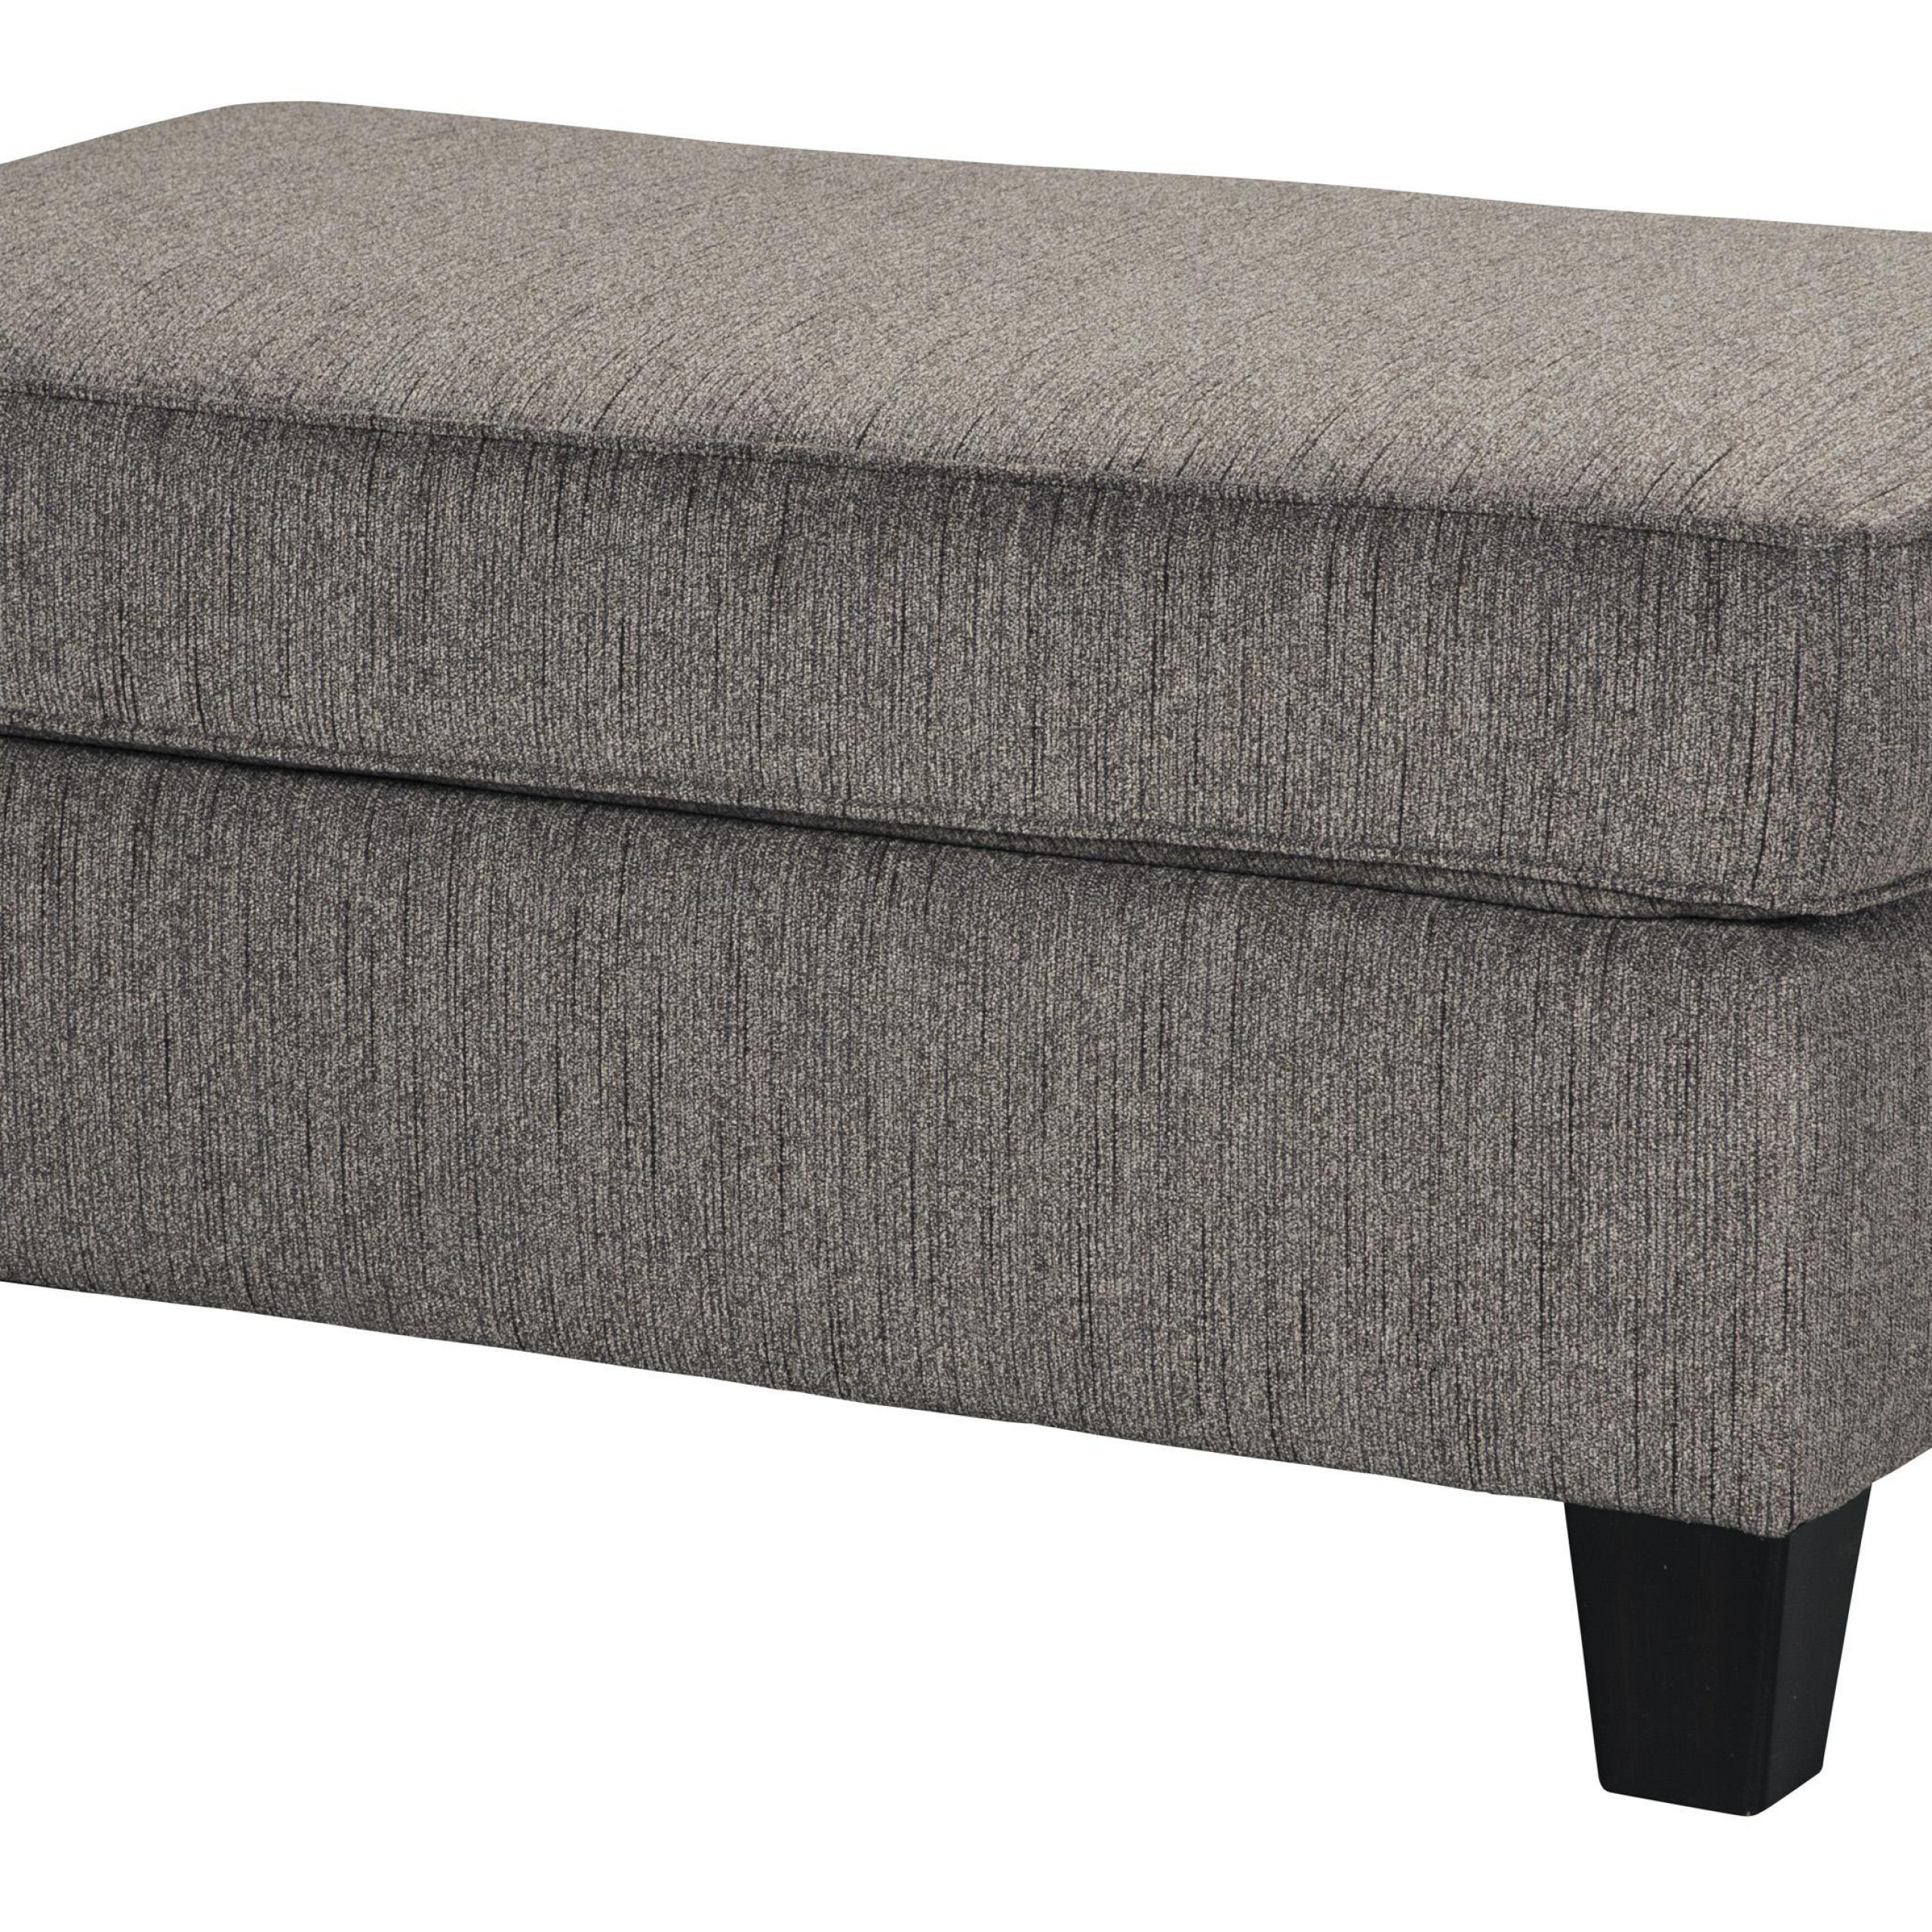 Preferred Fabric Upholstered Wooden Ottoman With Tapered Legs, Gray And Black With Dark Red And Cream Woven Pouf Ottomans (View 3 of 10)